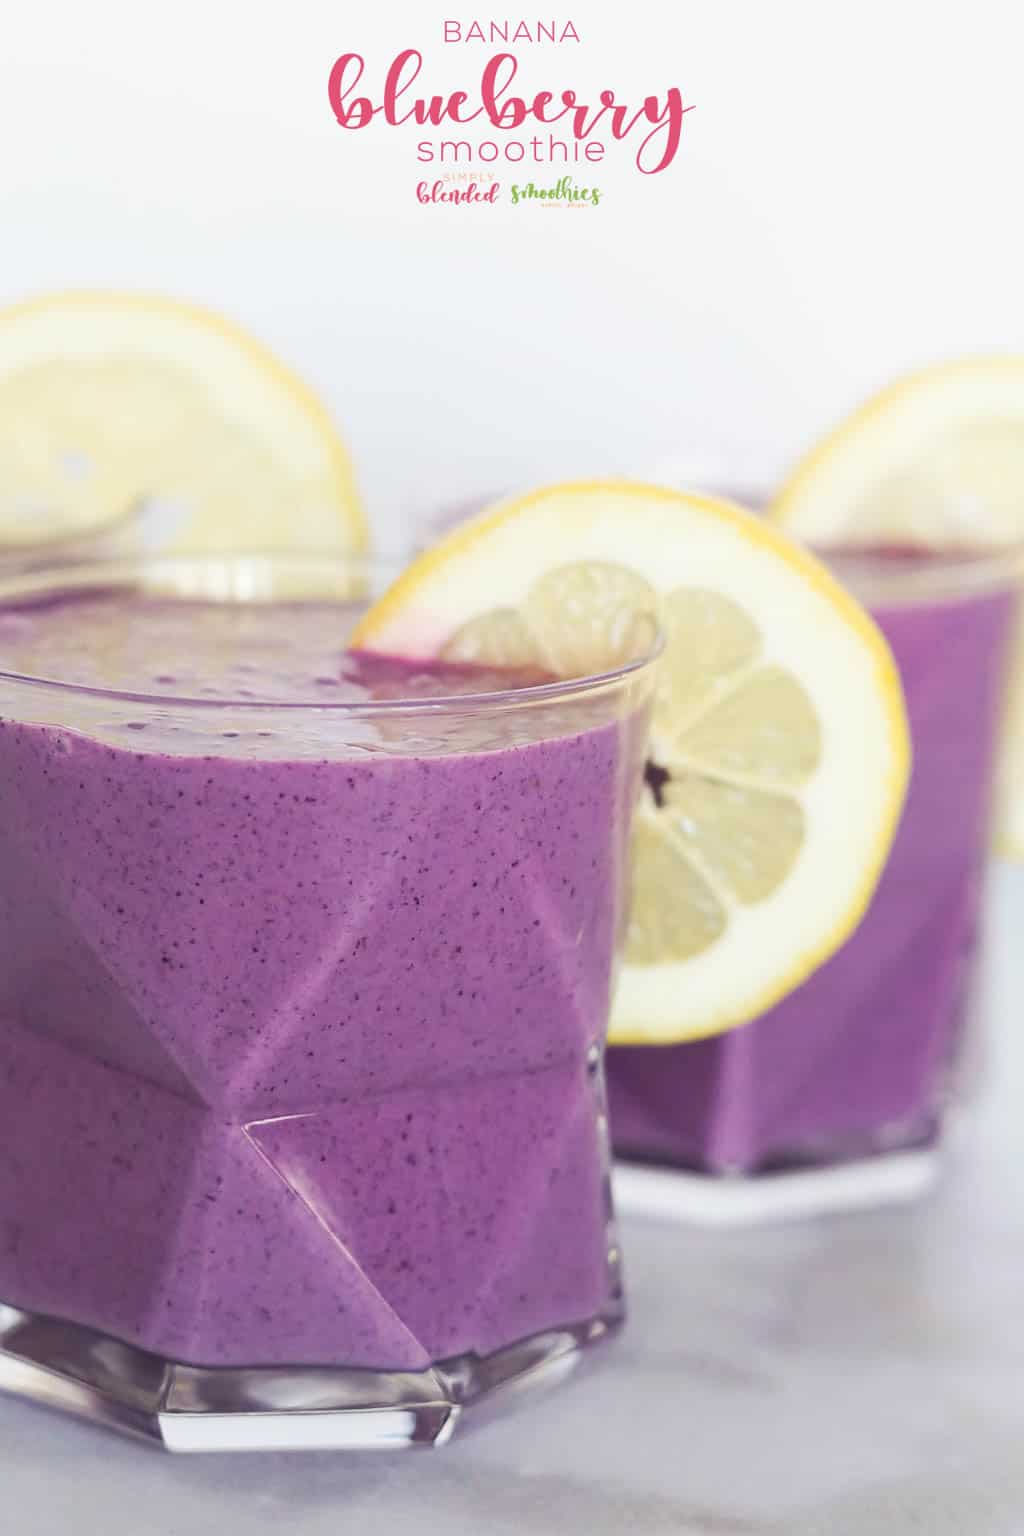 Blueberry Banana Smoothie - This Easy Berry Smoothie Recipe Is Delicious And Packed Full Of Antioxidants - It Is Such A Healthy Smoothie